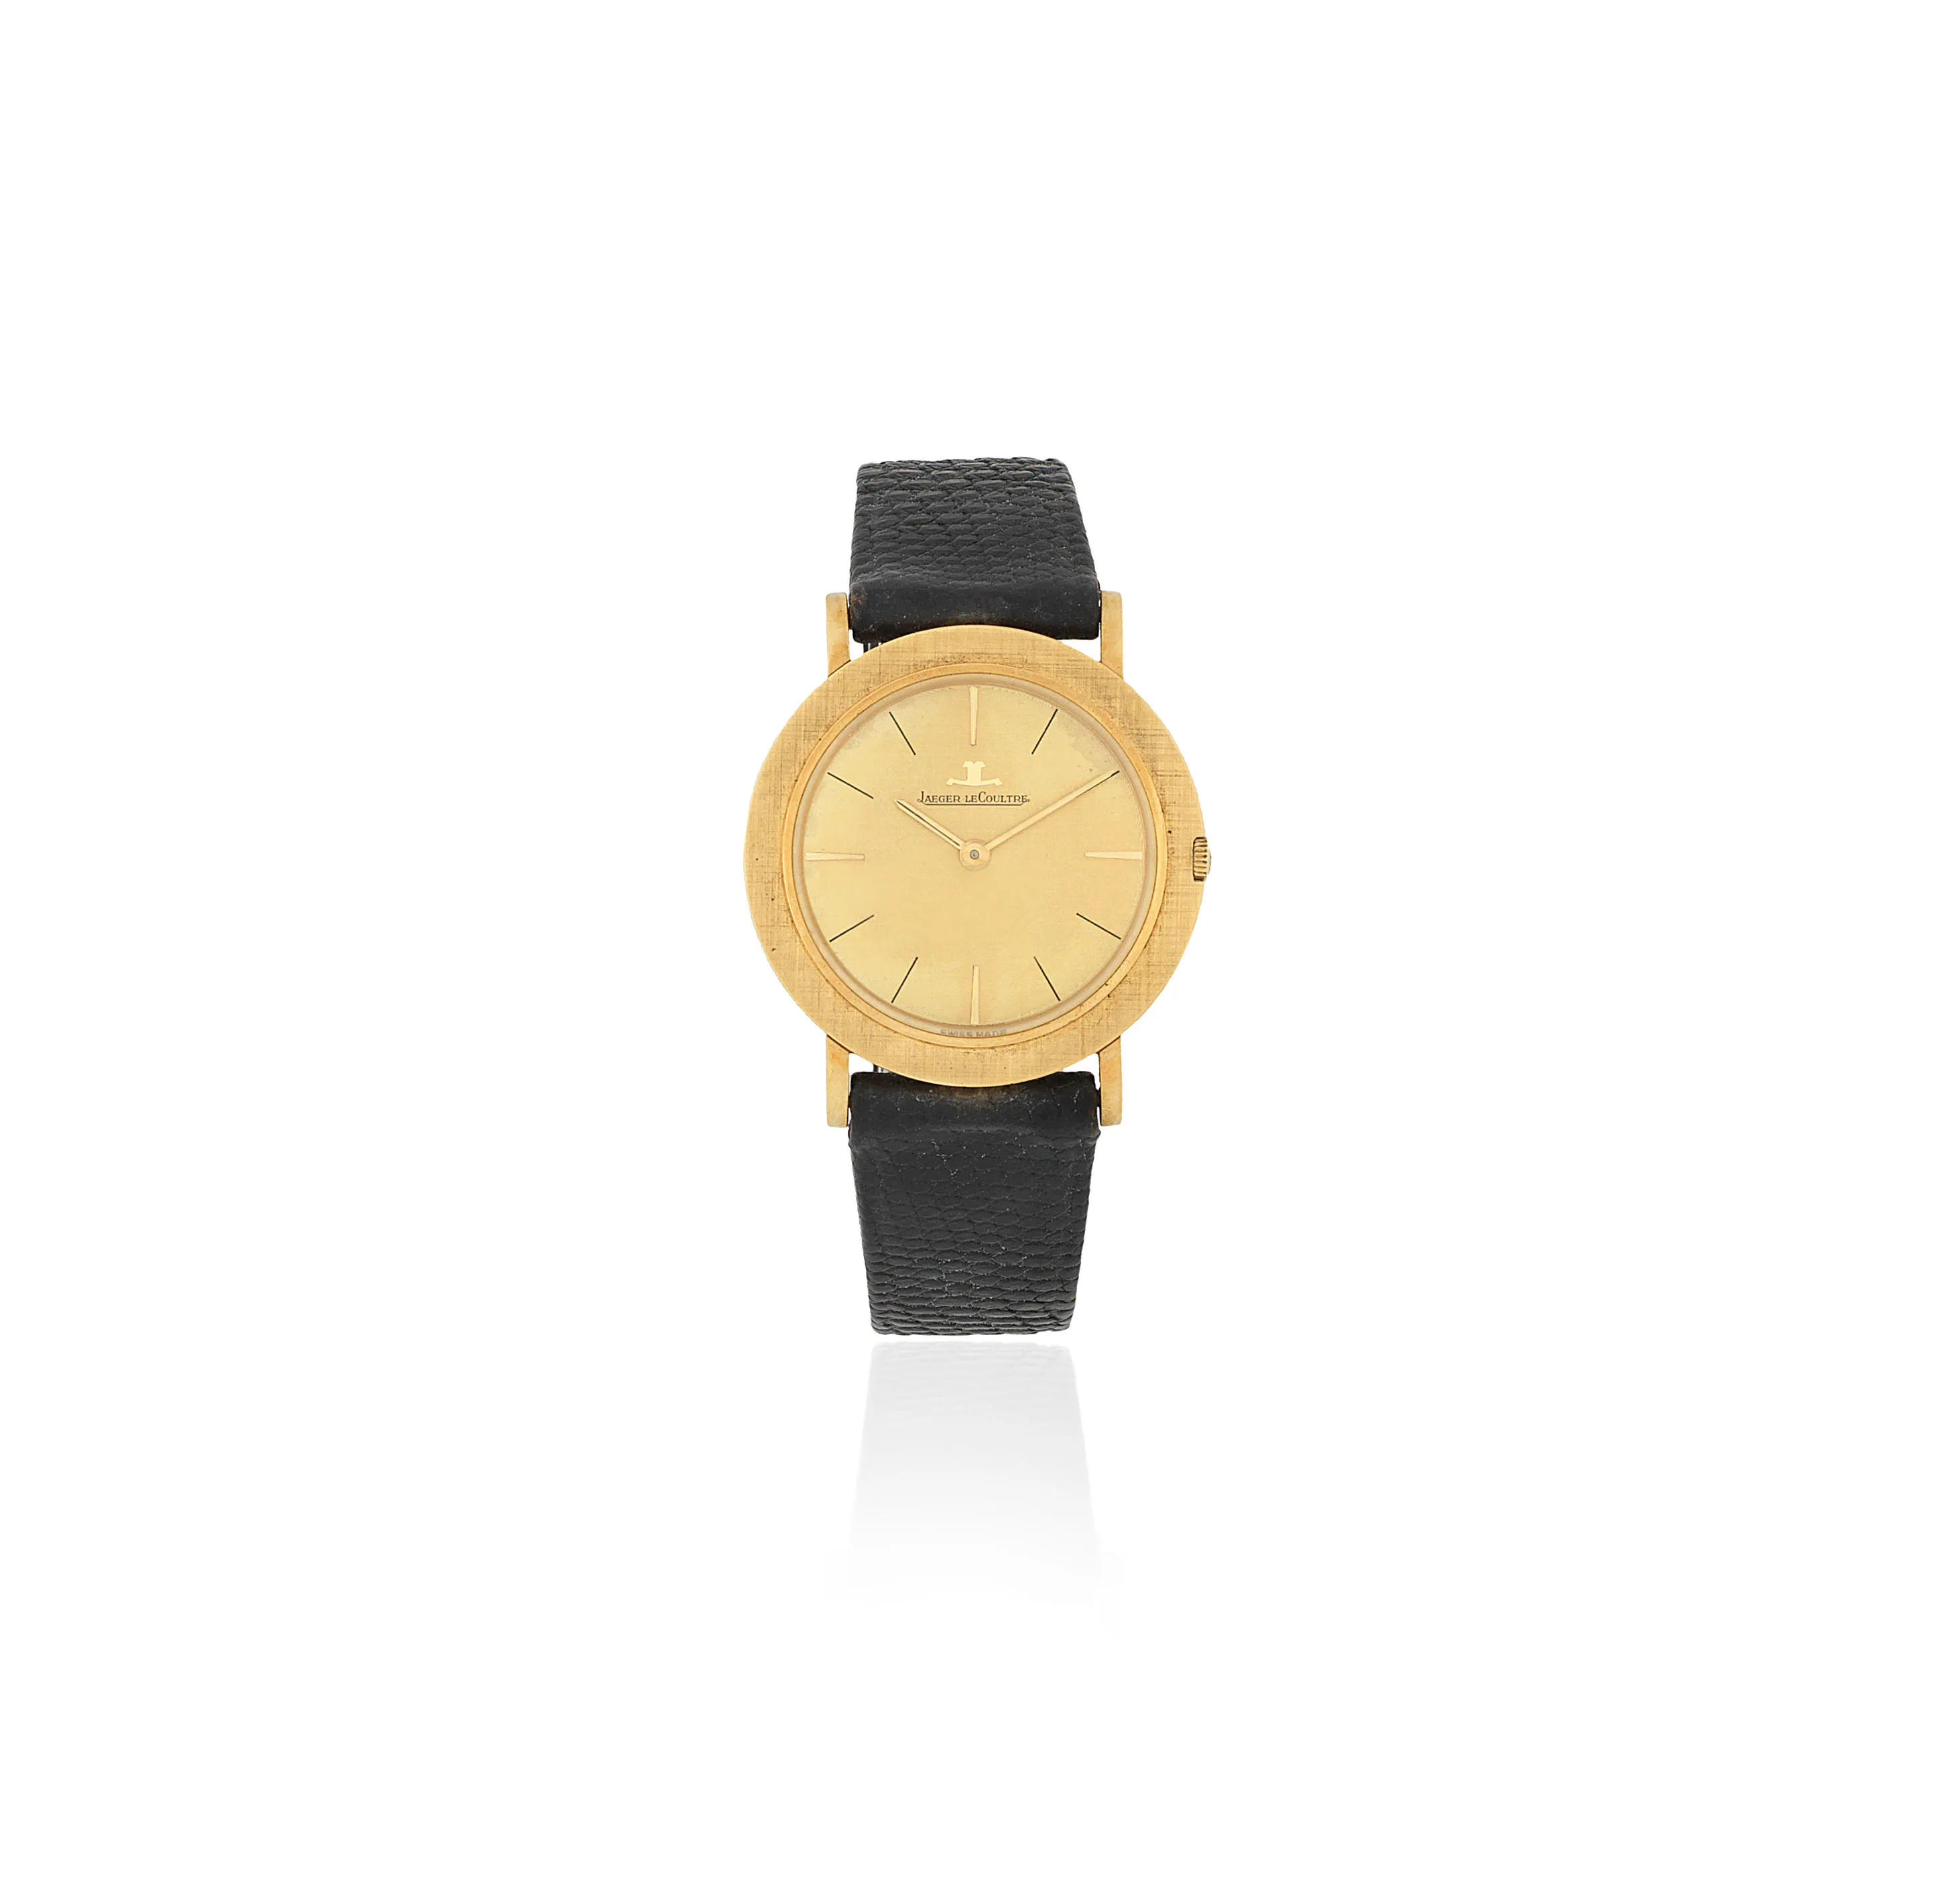 Jaeger-LeCoultre 270.2.62 32mm Yellow gold Champagne